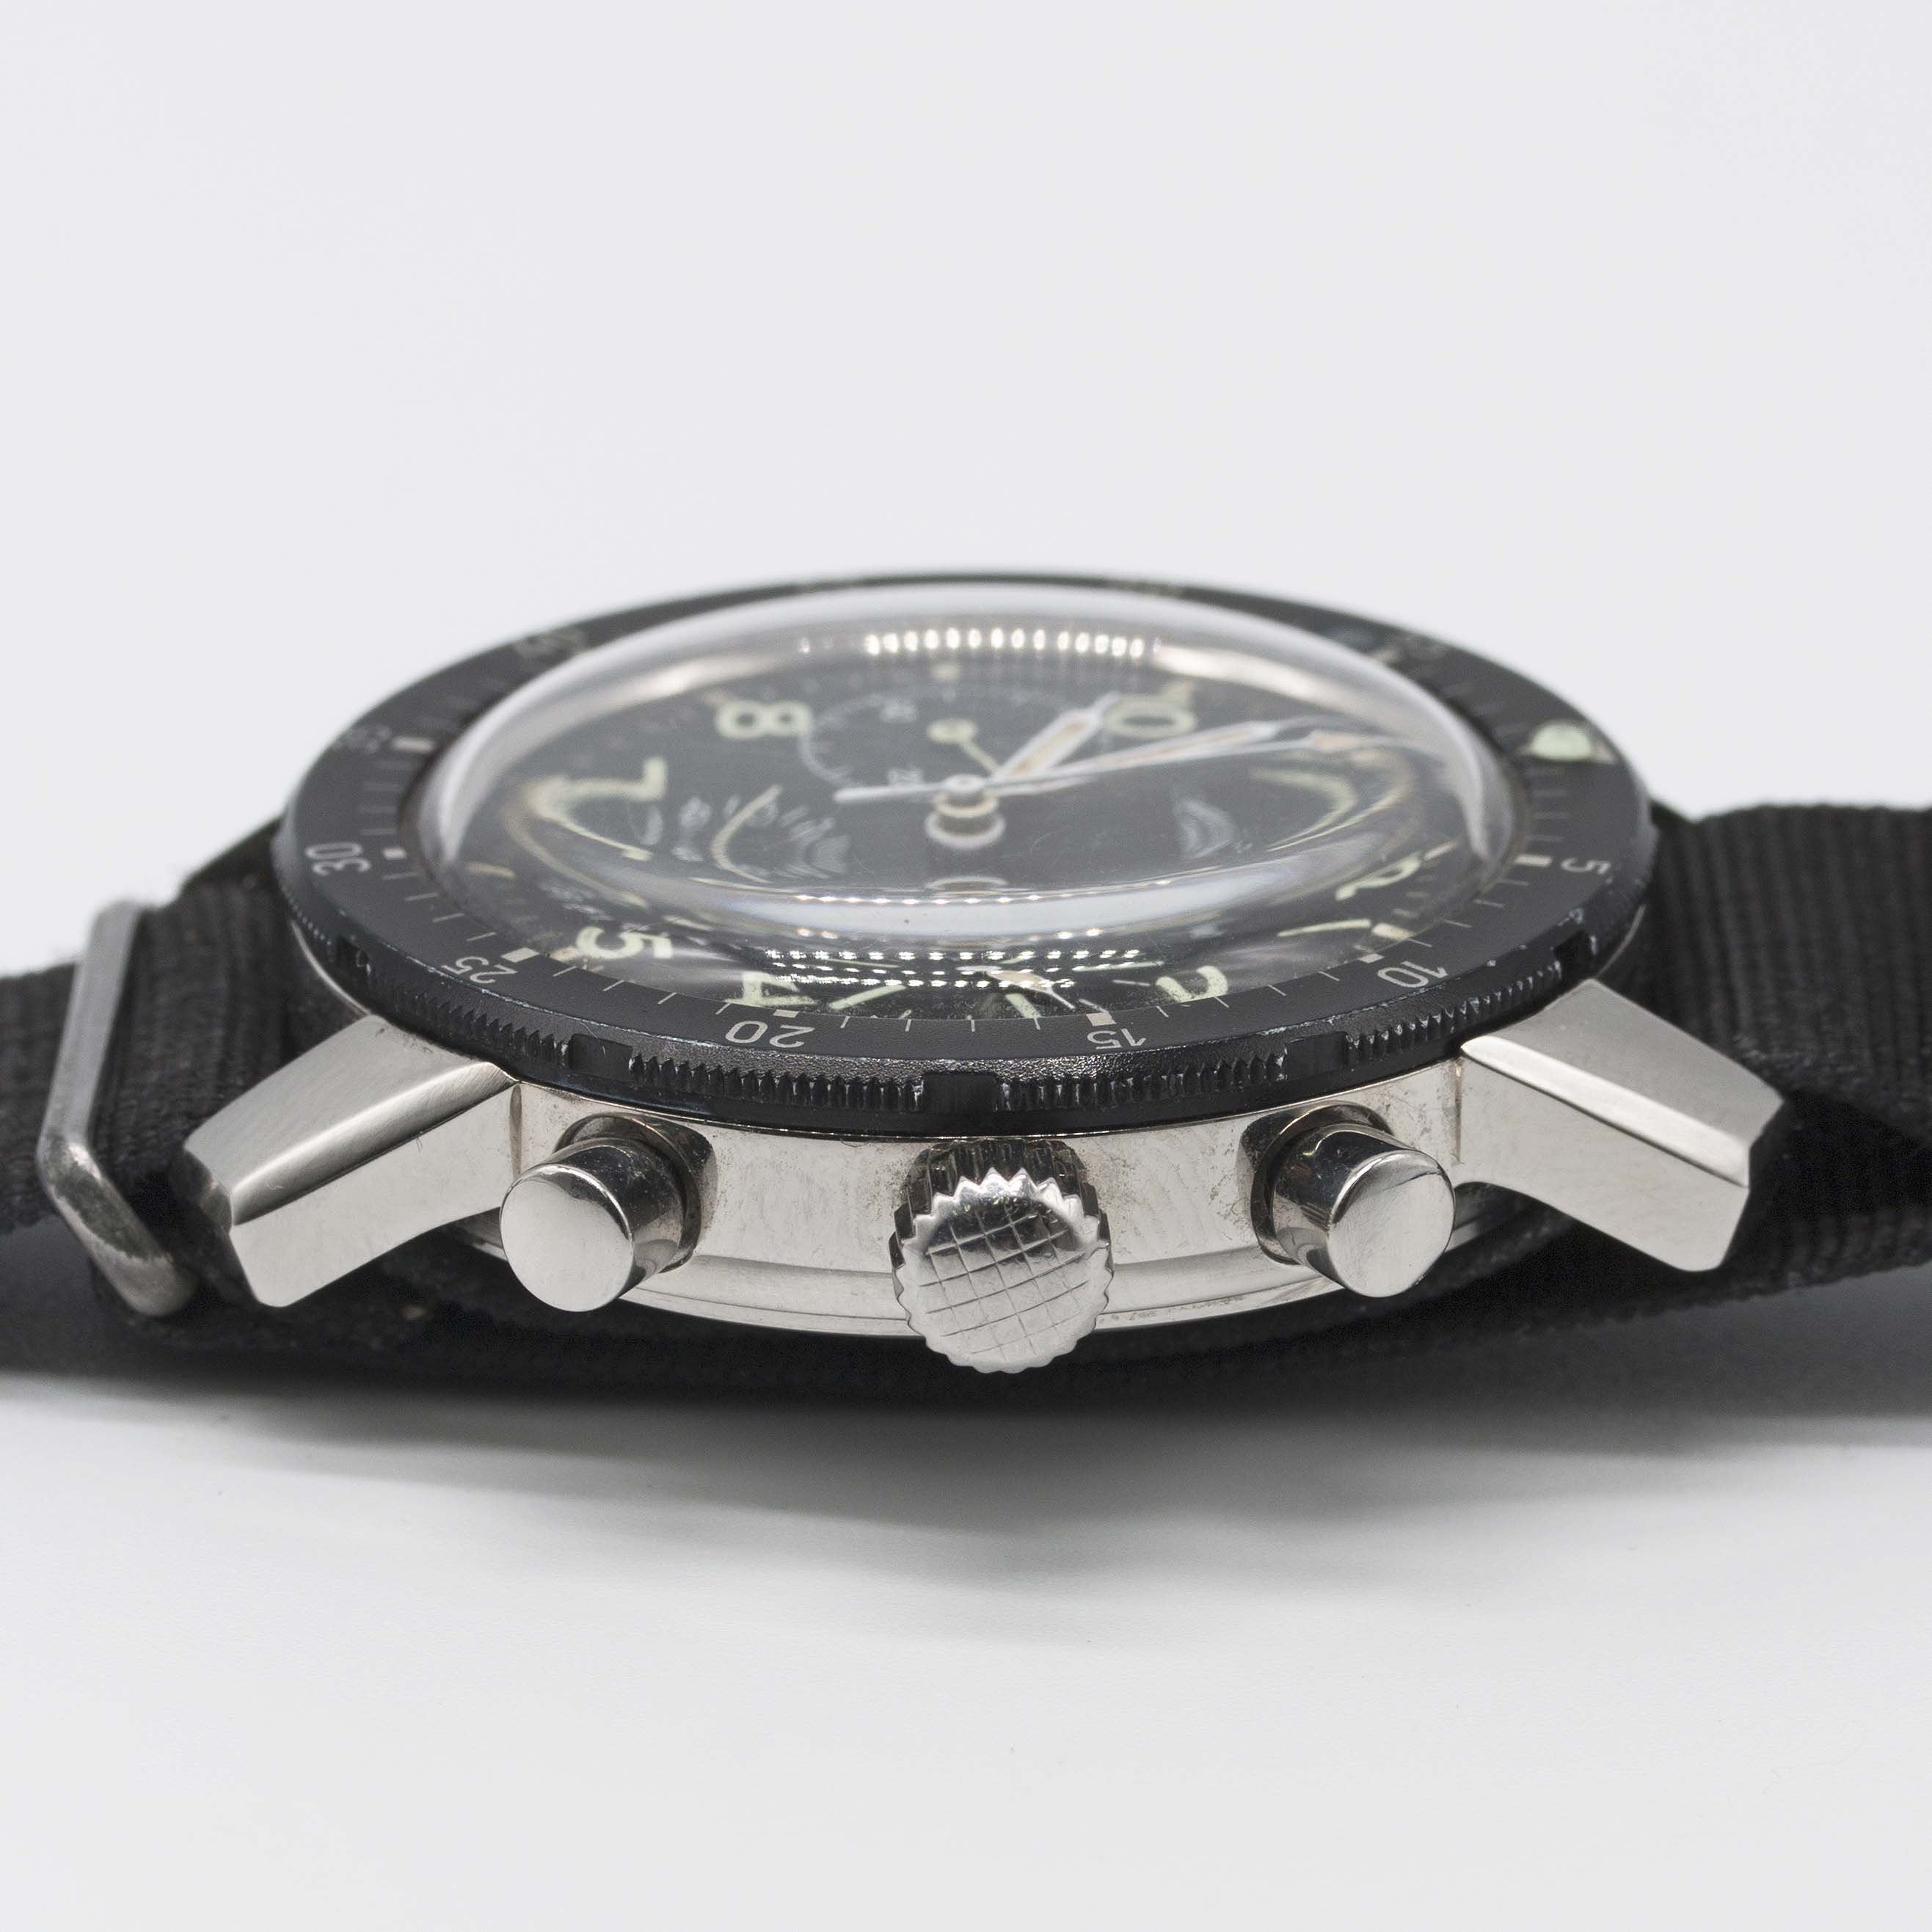 A RARE GENTLEMAN'S STAINLESS STEEL BREGUET TYPE XX FLYBACK CHRONOGRAPH PILOTS WRIST WATCH CIRCA - Image 11 of 11